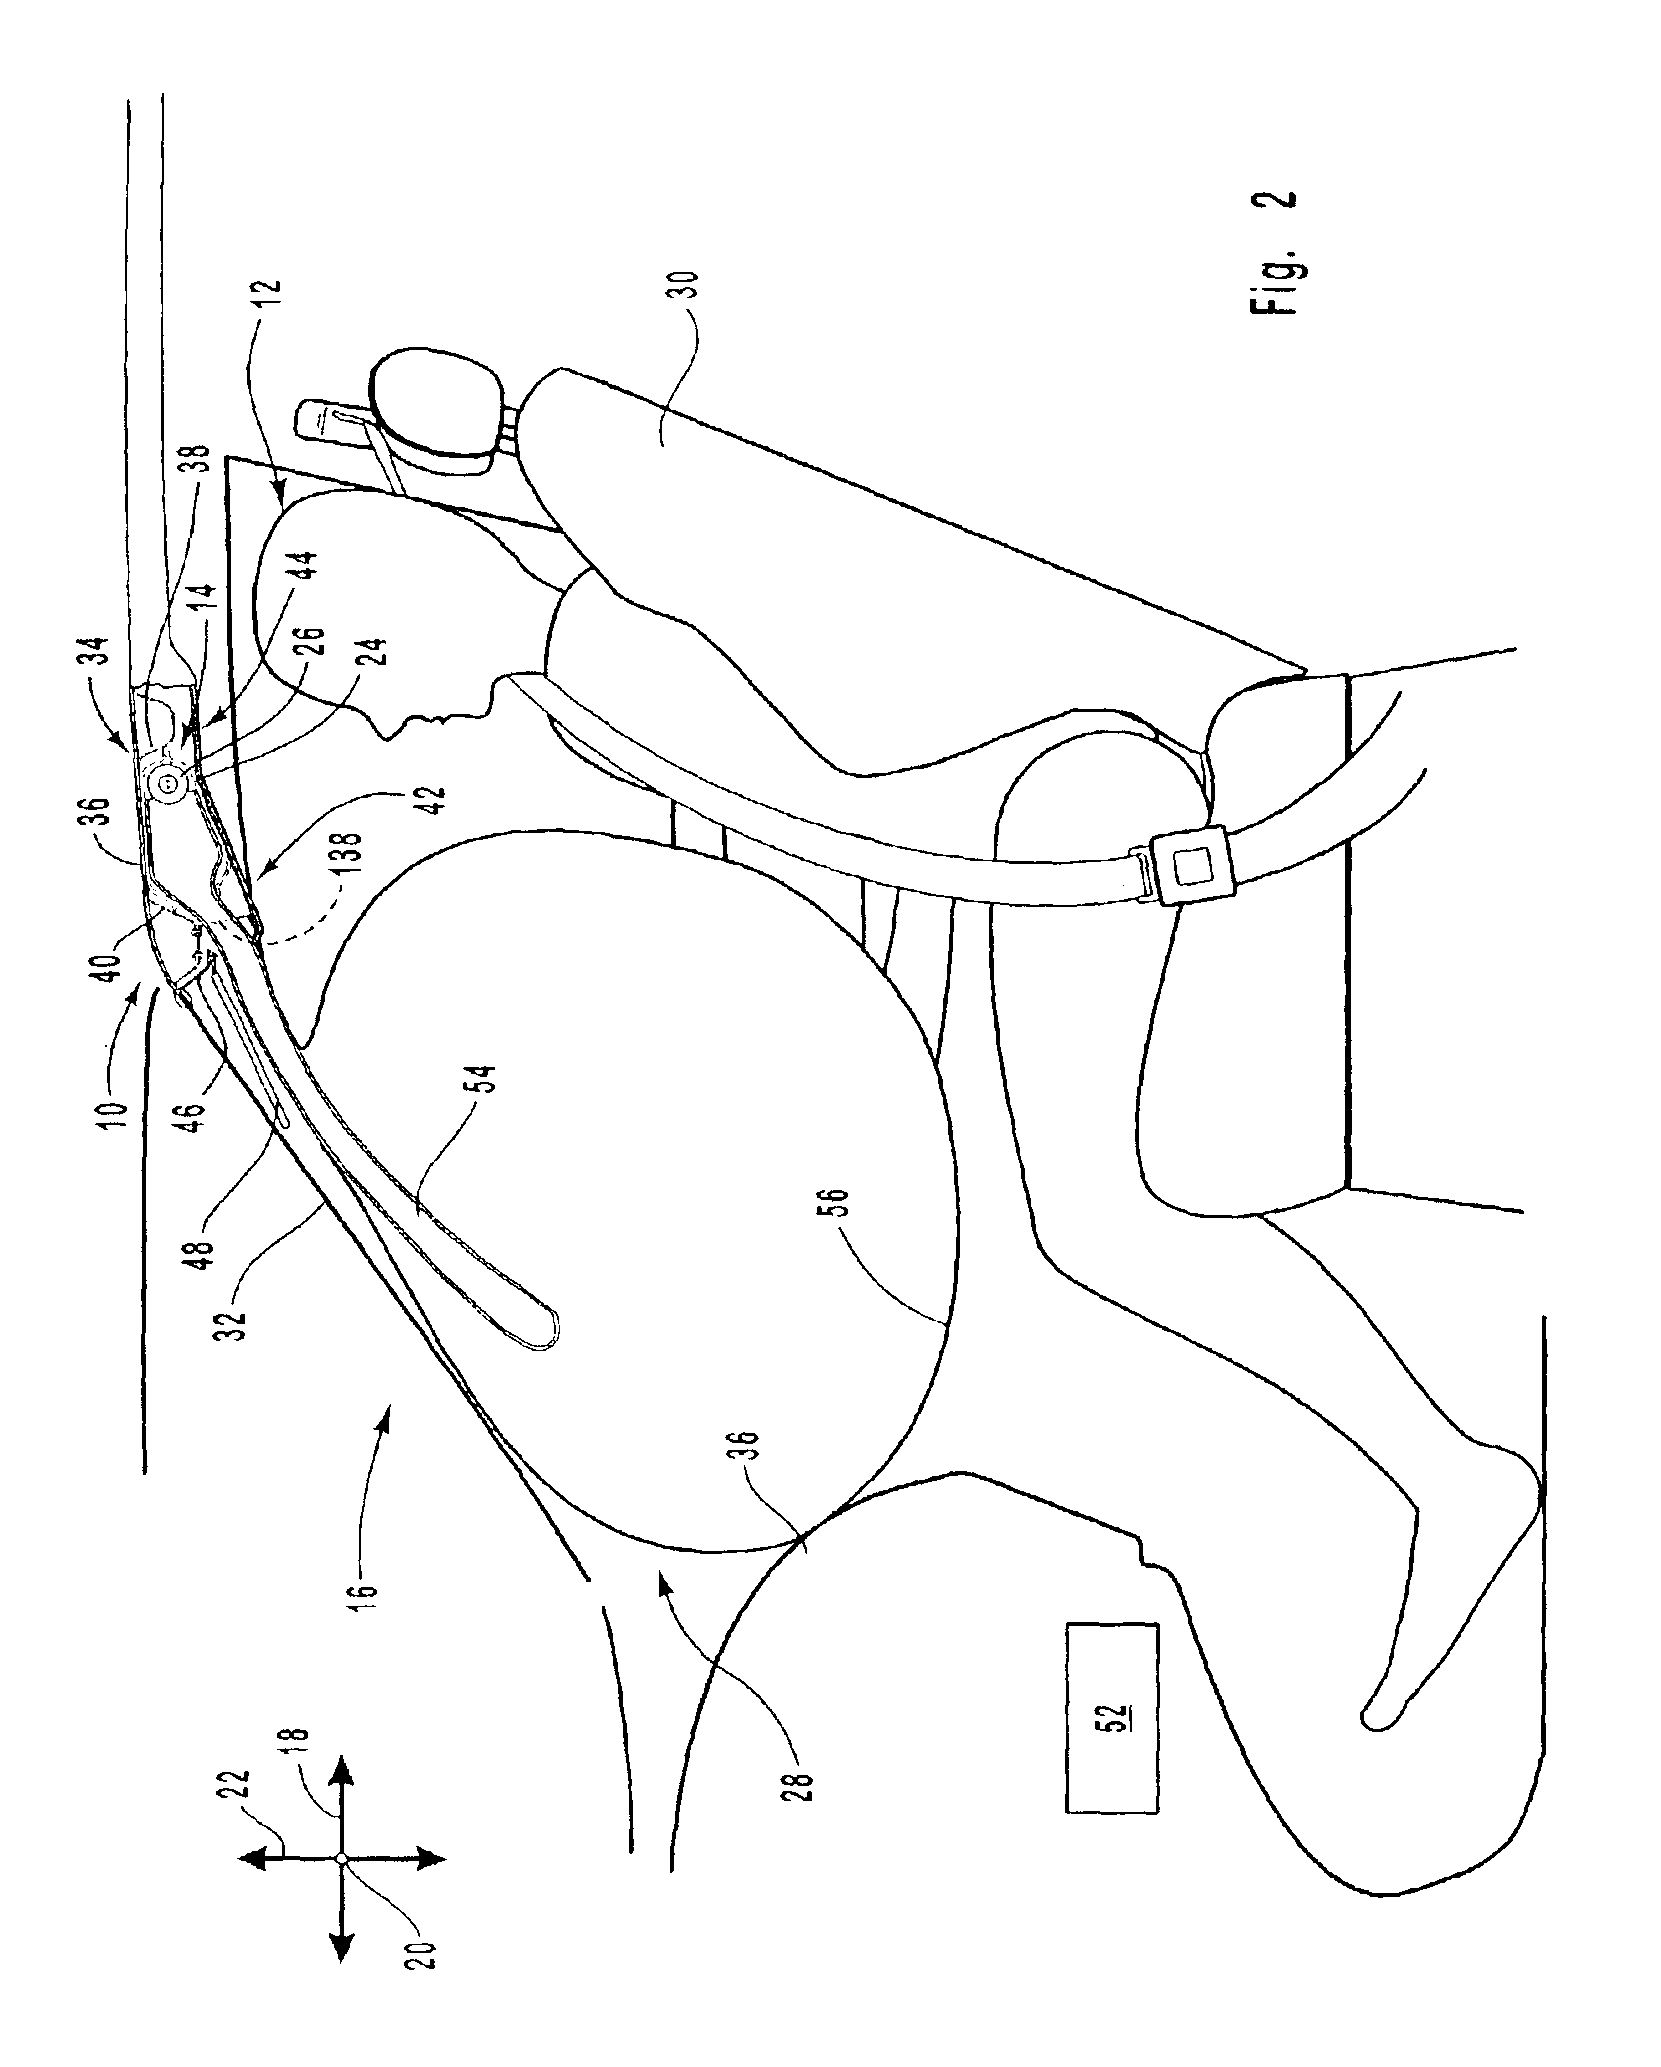 Overhead airbag deployment apparatus and method